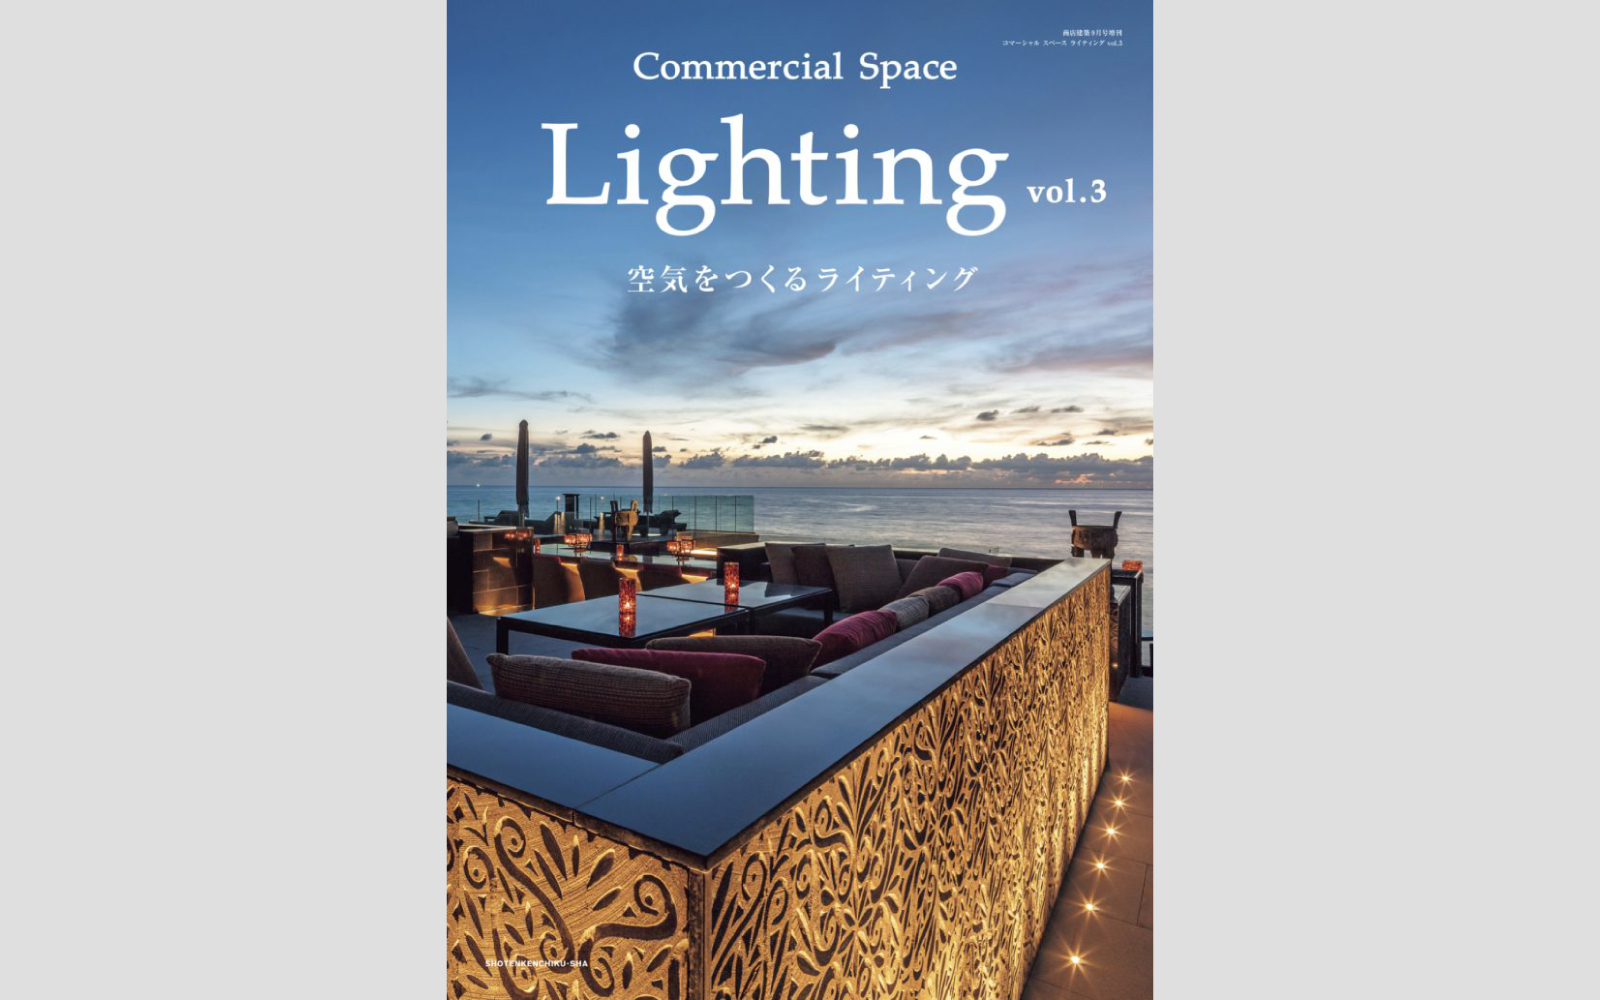 Commercial Space Lighting vol.3掲載